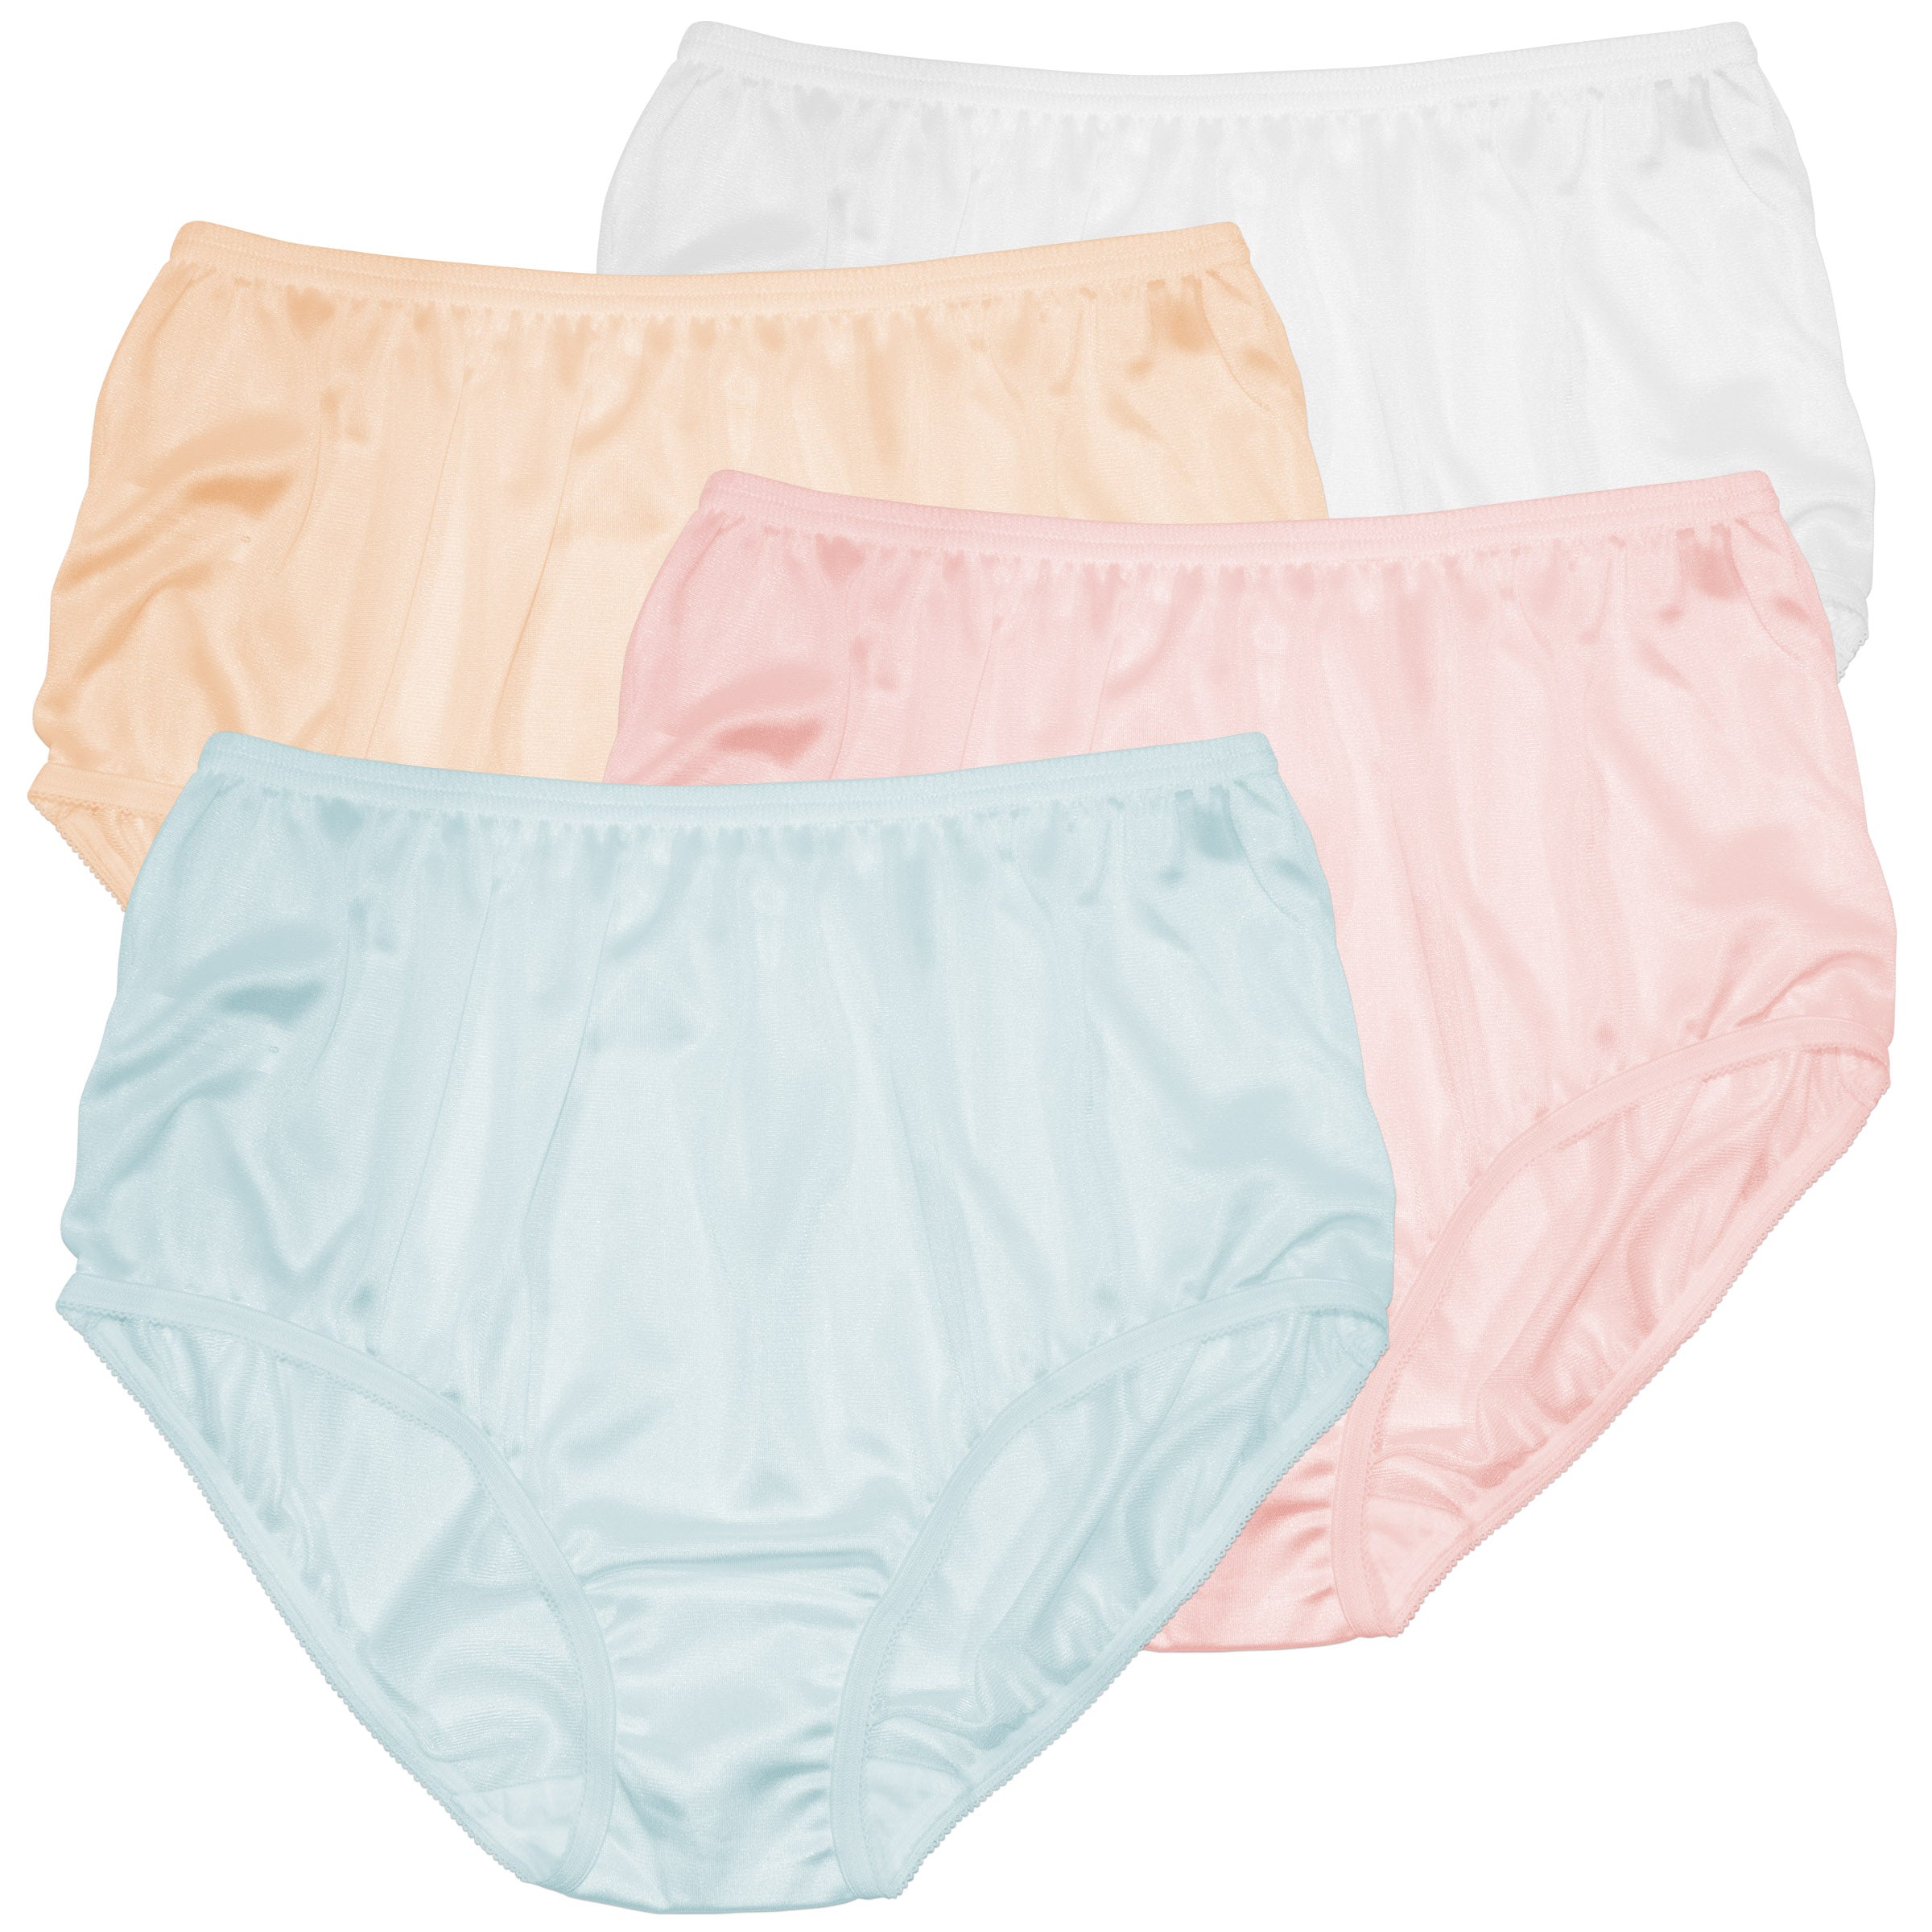 Teri Classic Nylon Full Coverage Panty Assorted 4 Pack - Style H331P